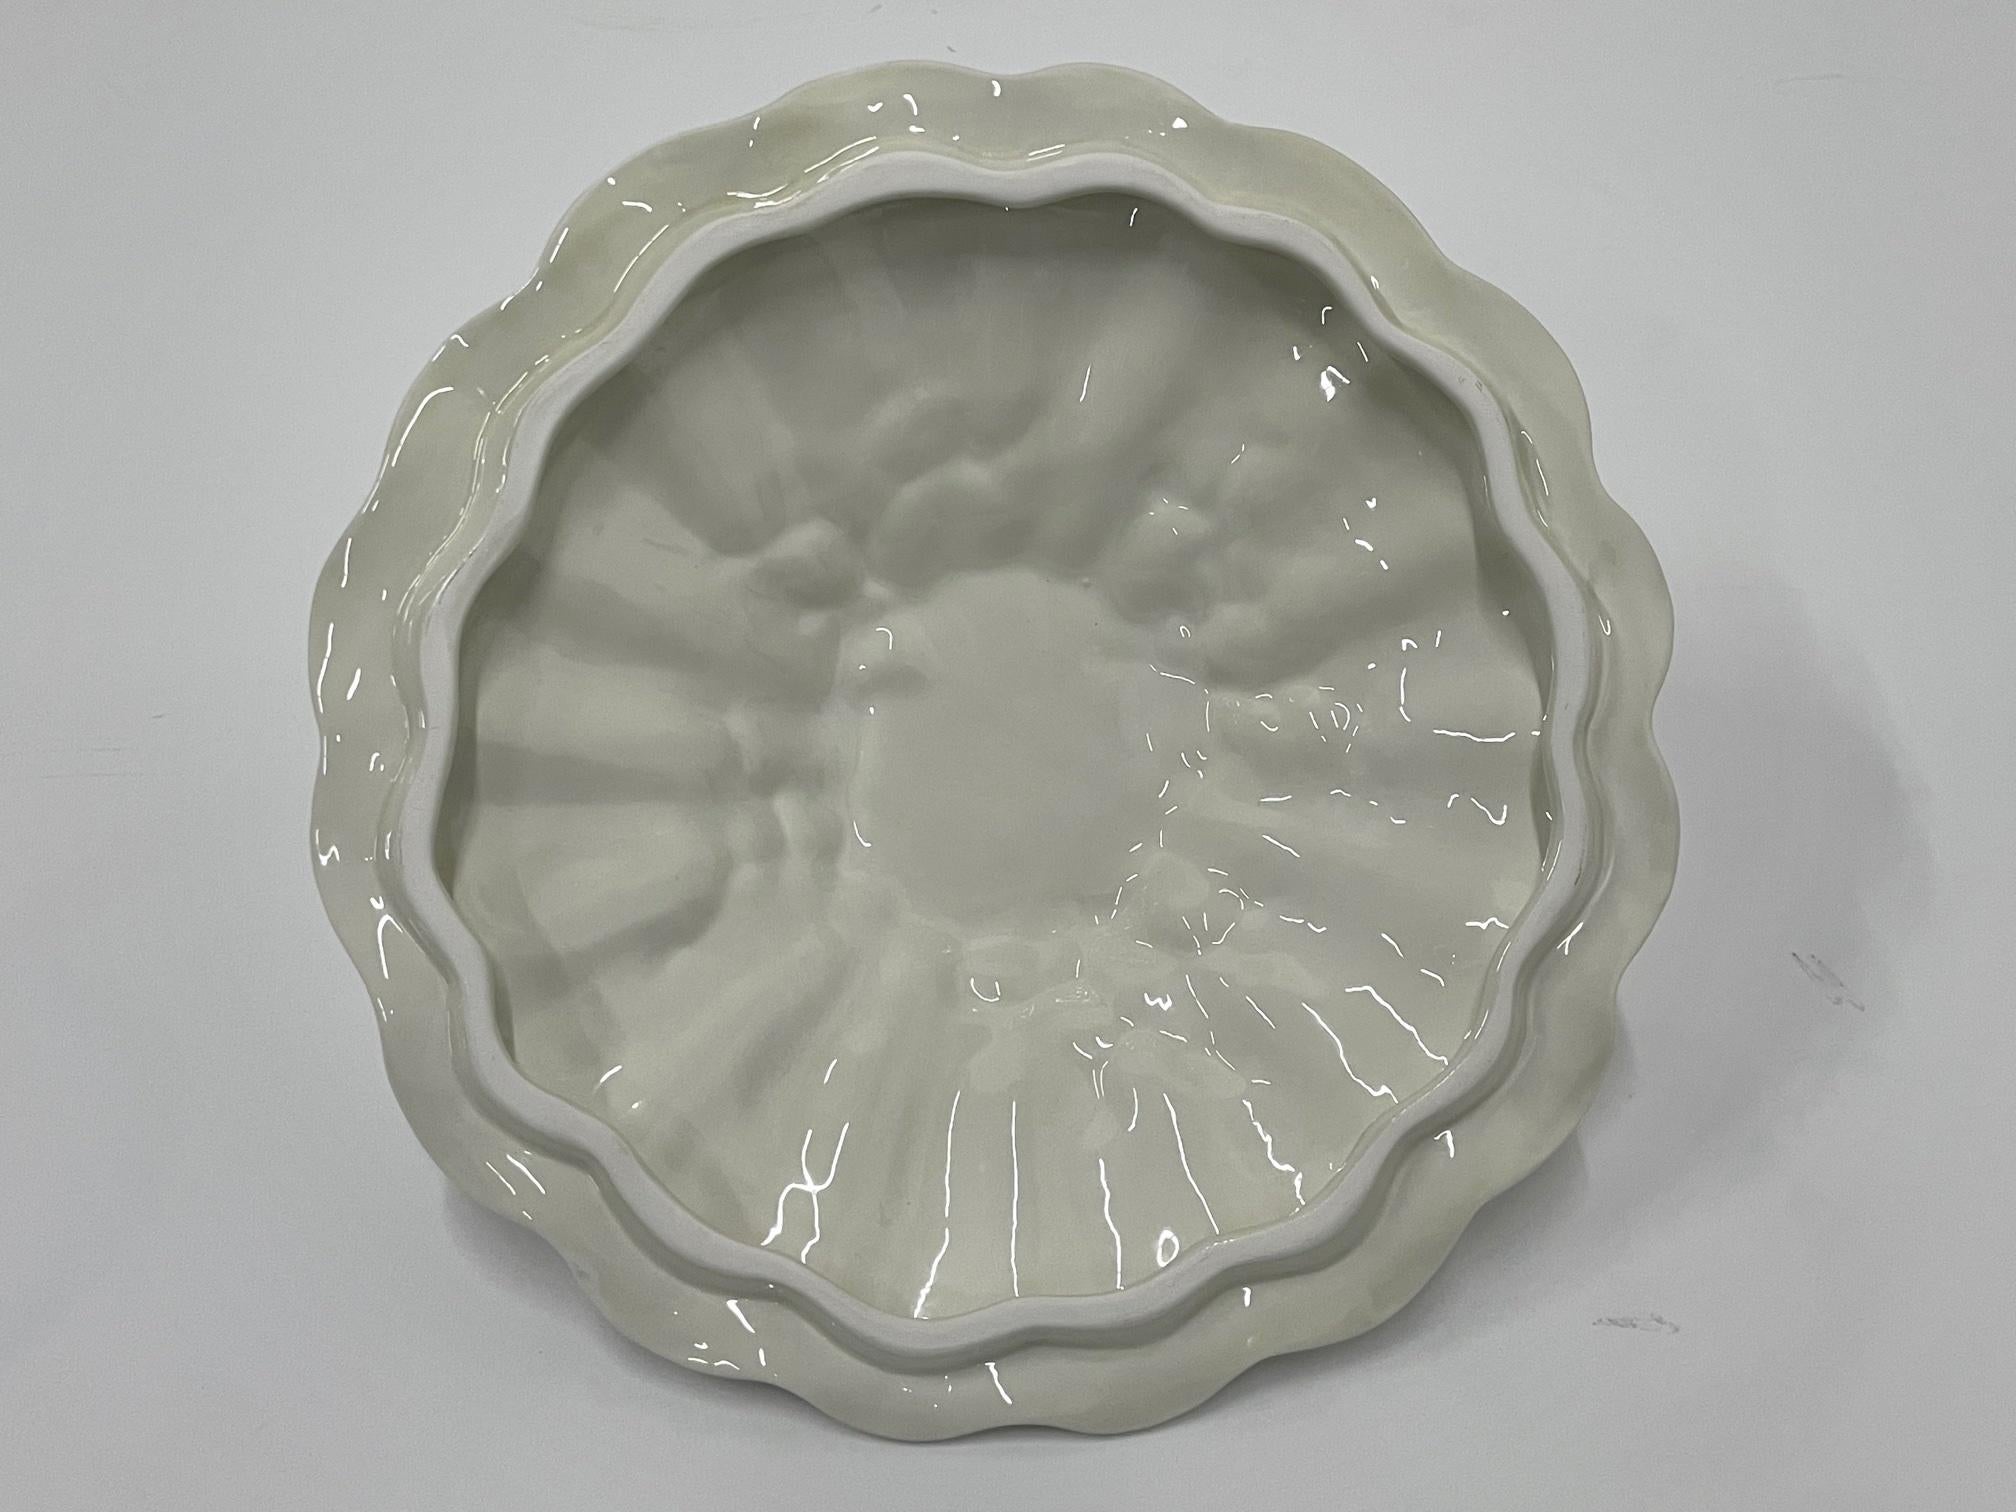 North American Beautiful Fitz & Floyd Tureen with Shell Decoration